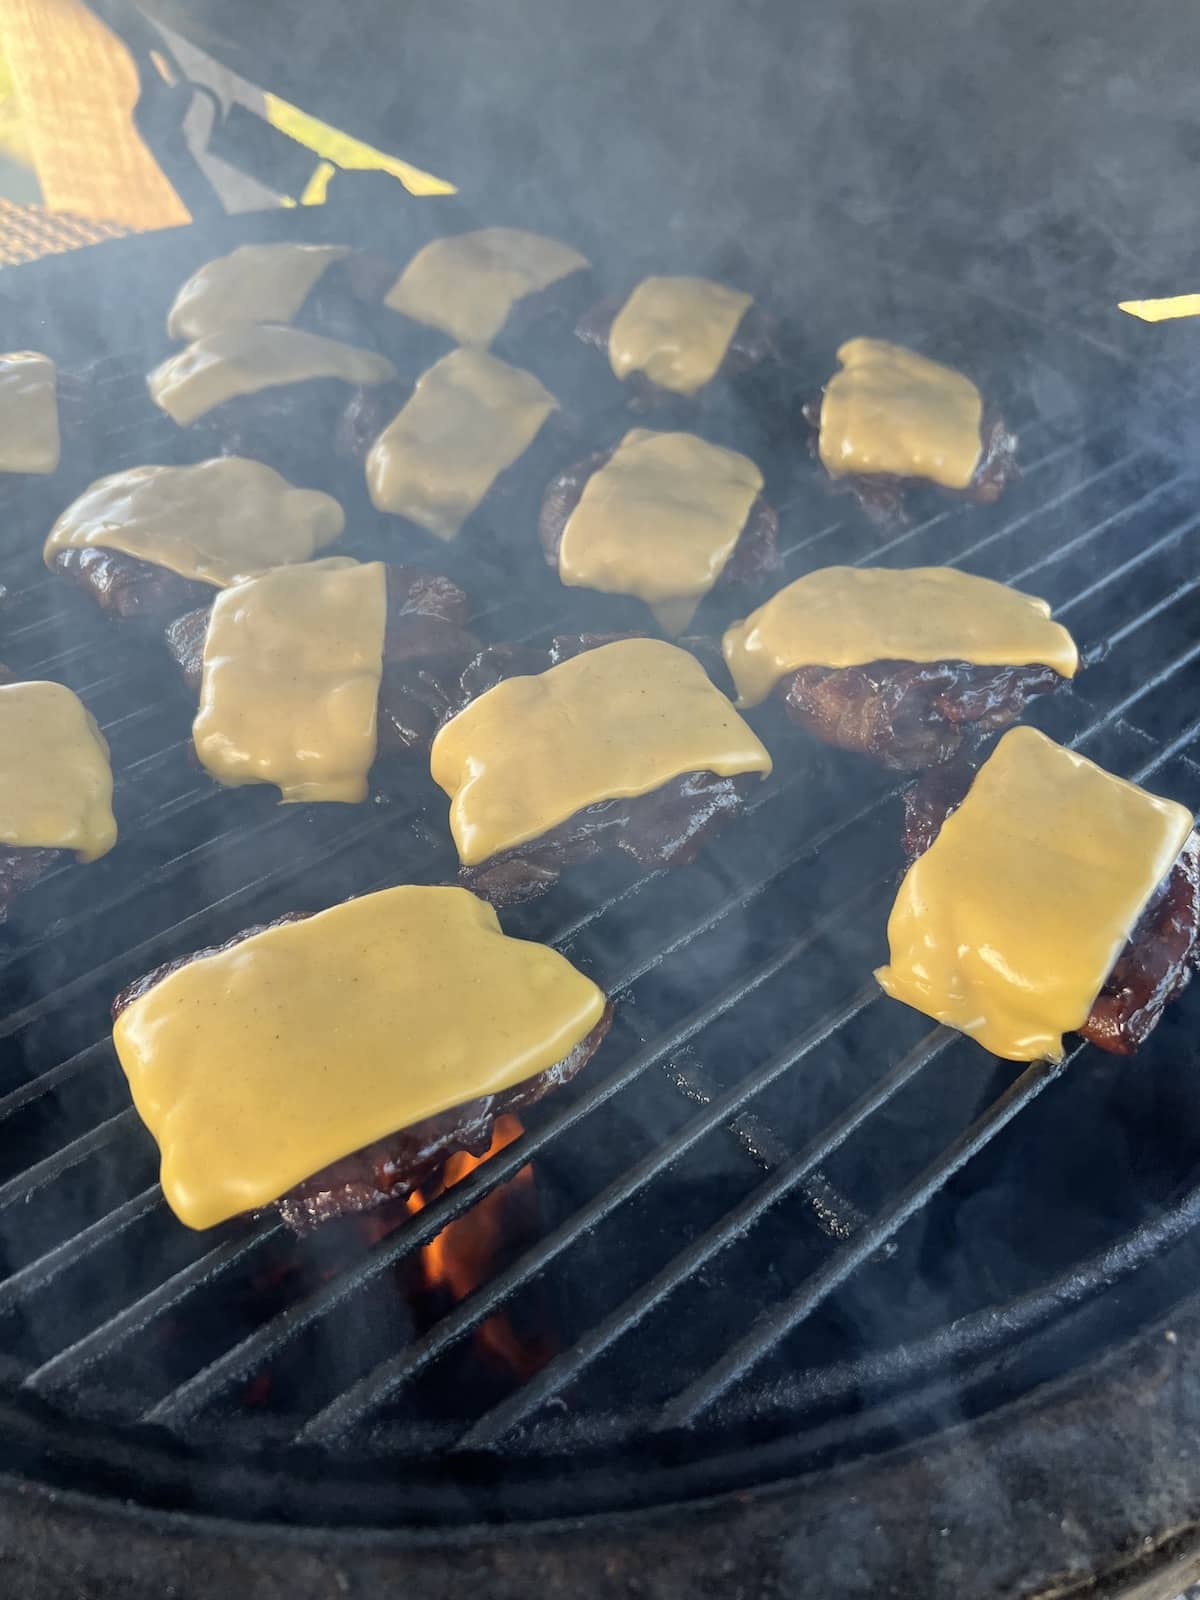 Burger sliders with cheese on a grill.